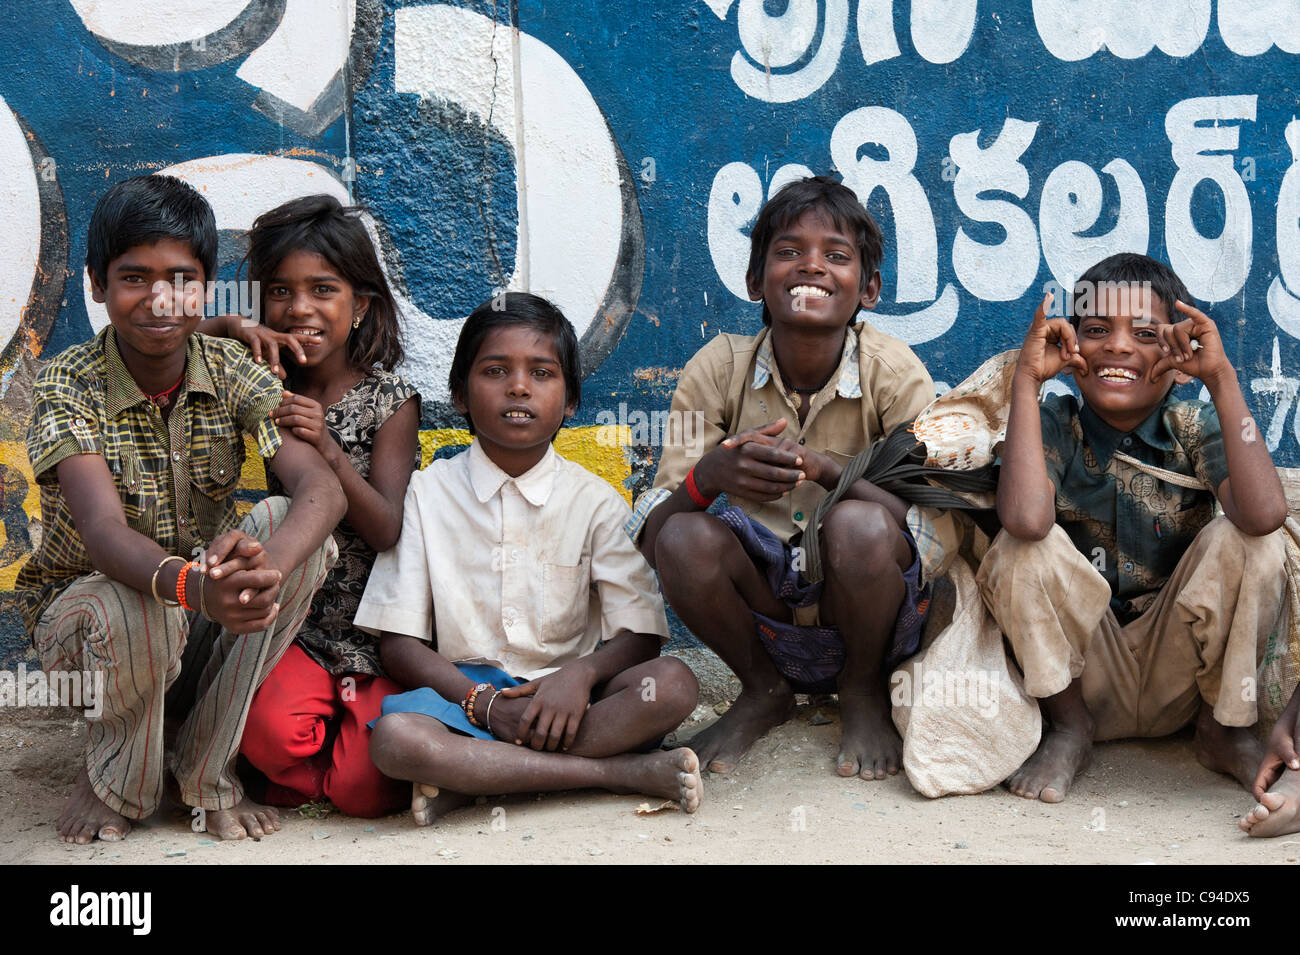 Happy young poor lower caste Indian nomadic street children smiling and laughing. Andhra Pradesh, India Stock Photo